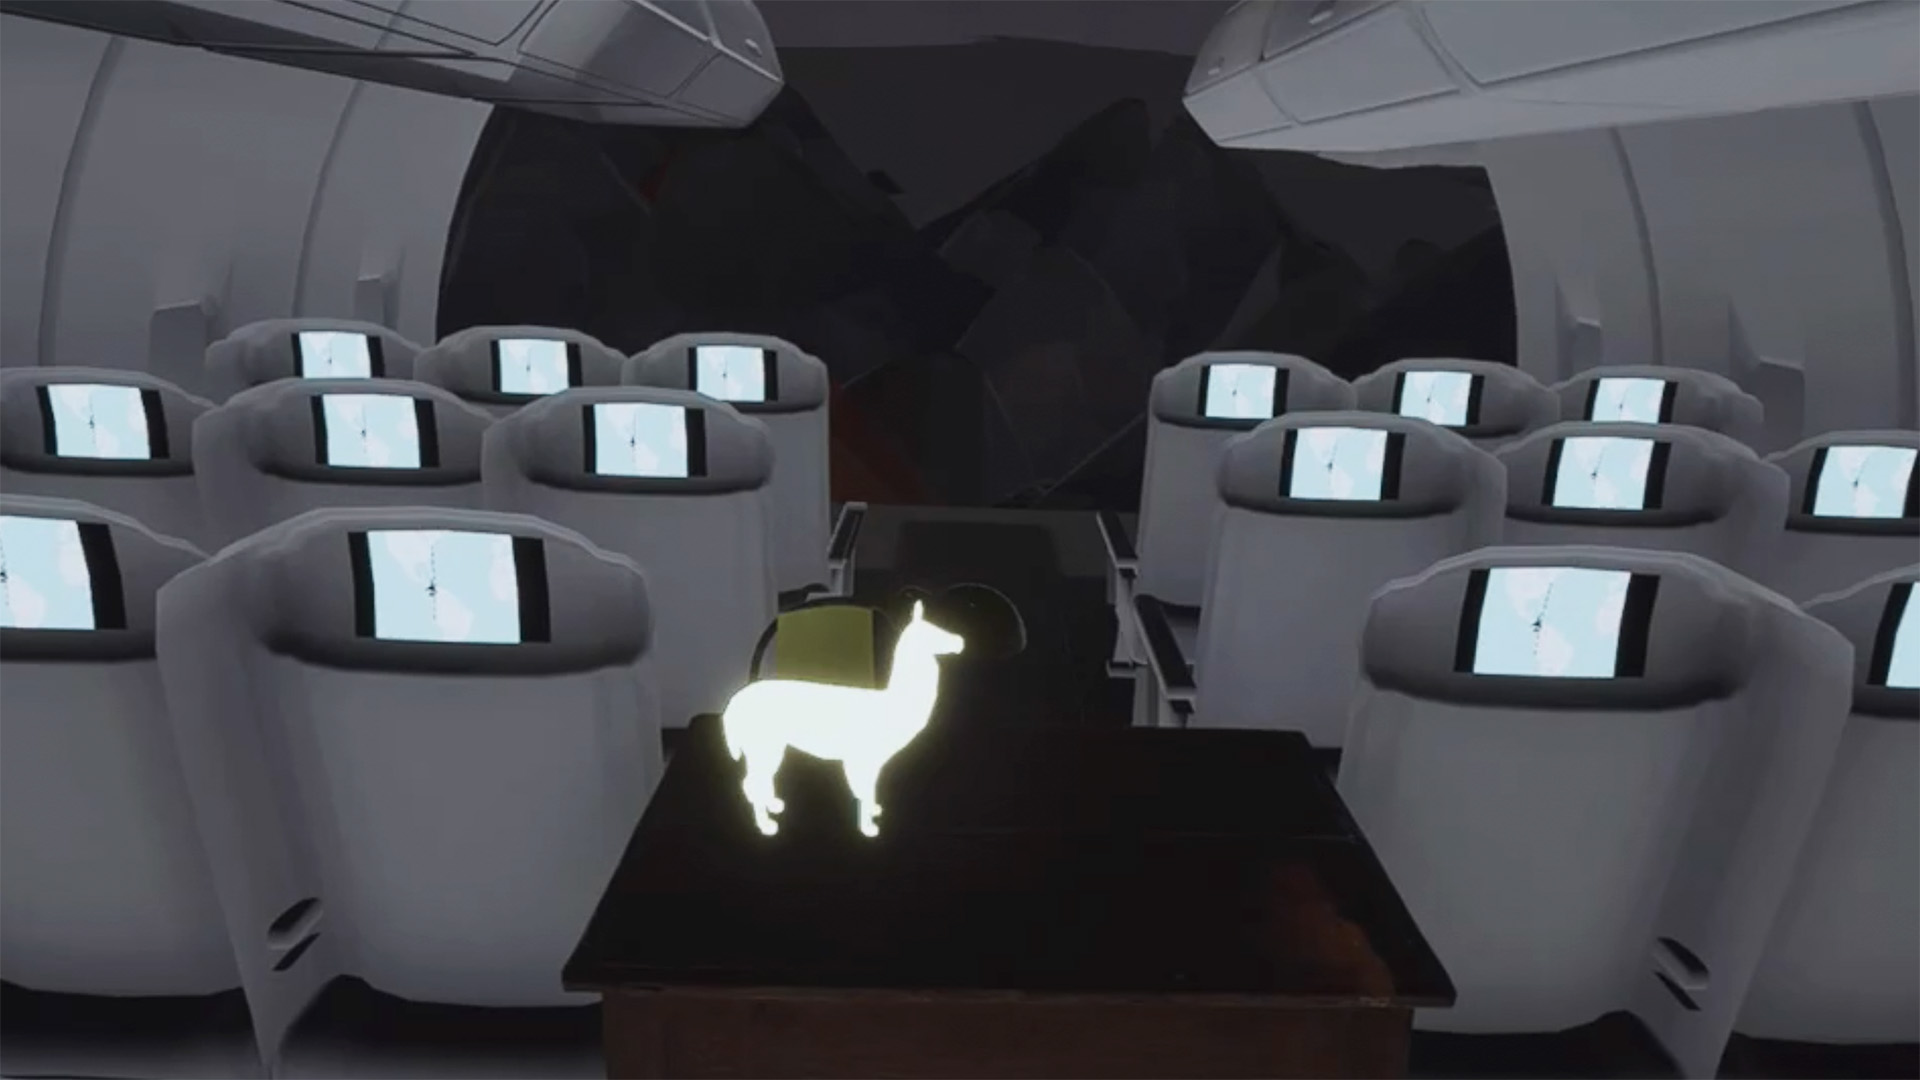 Image from Home, a VR experience by Oscar Durand. The image shows a representation of the inside of a plane.